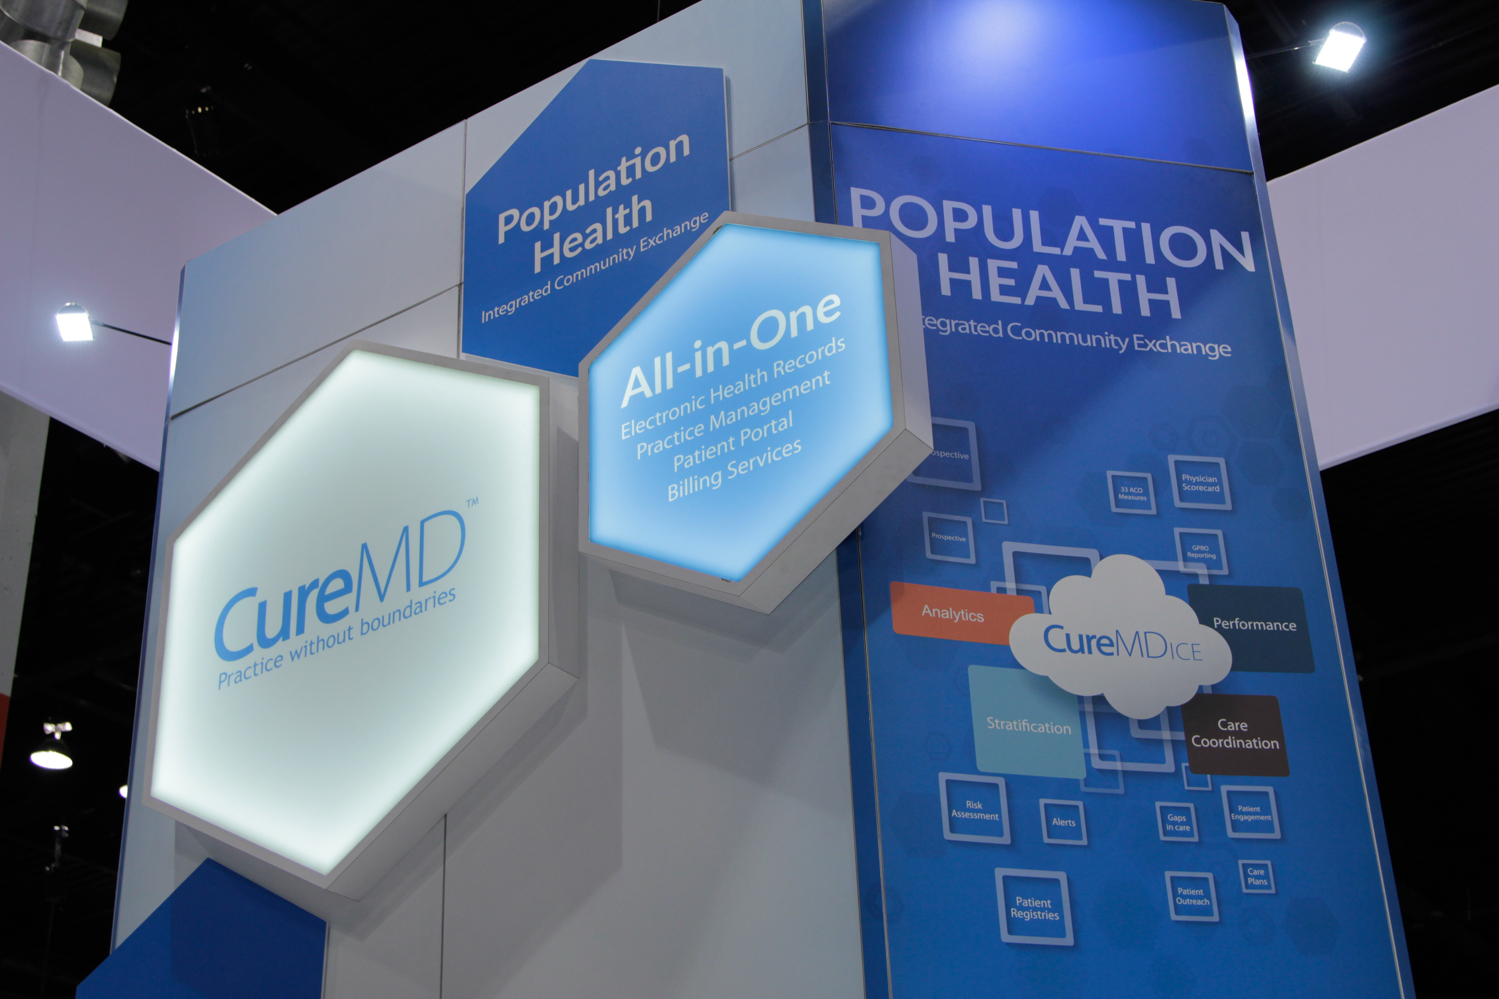 CureMD at HIMSS 2015